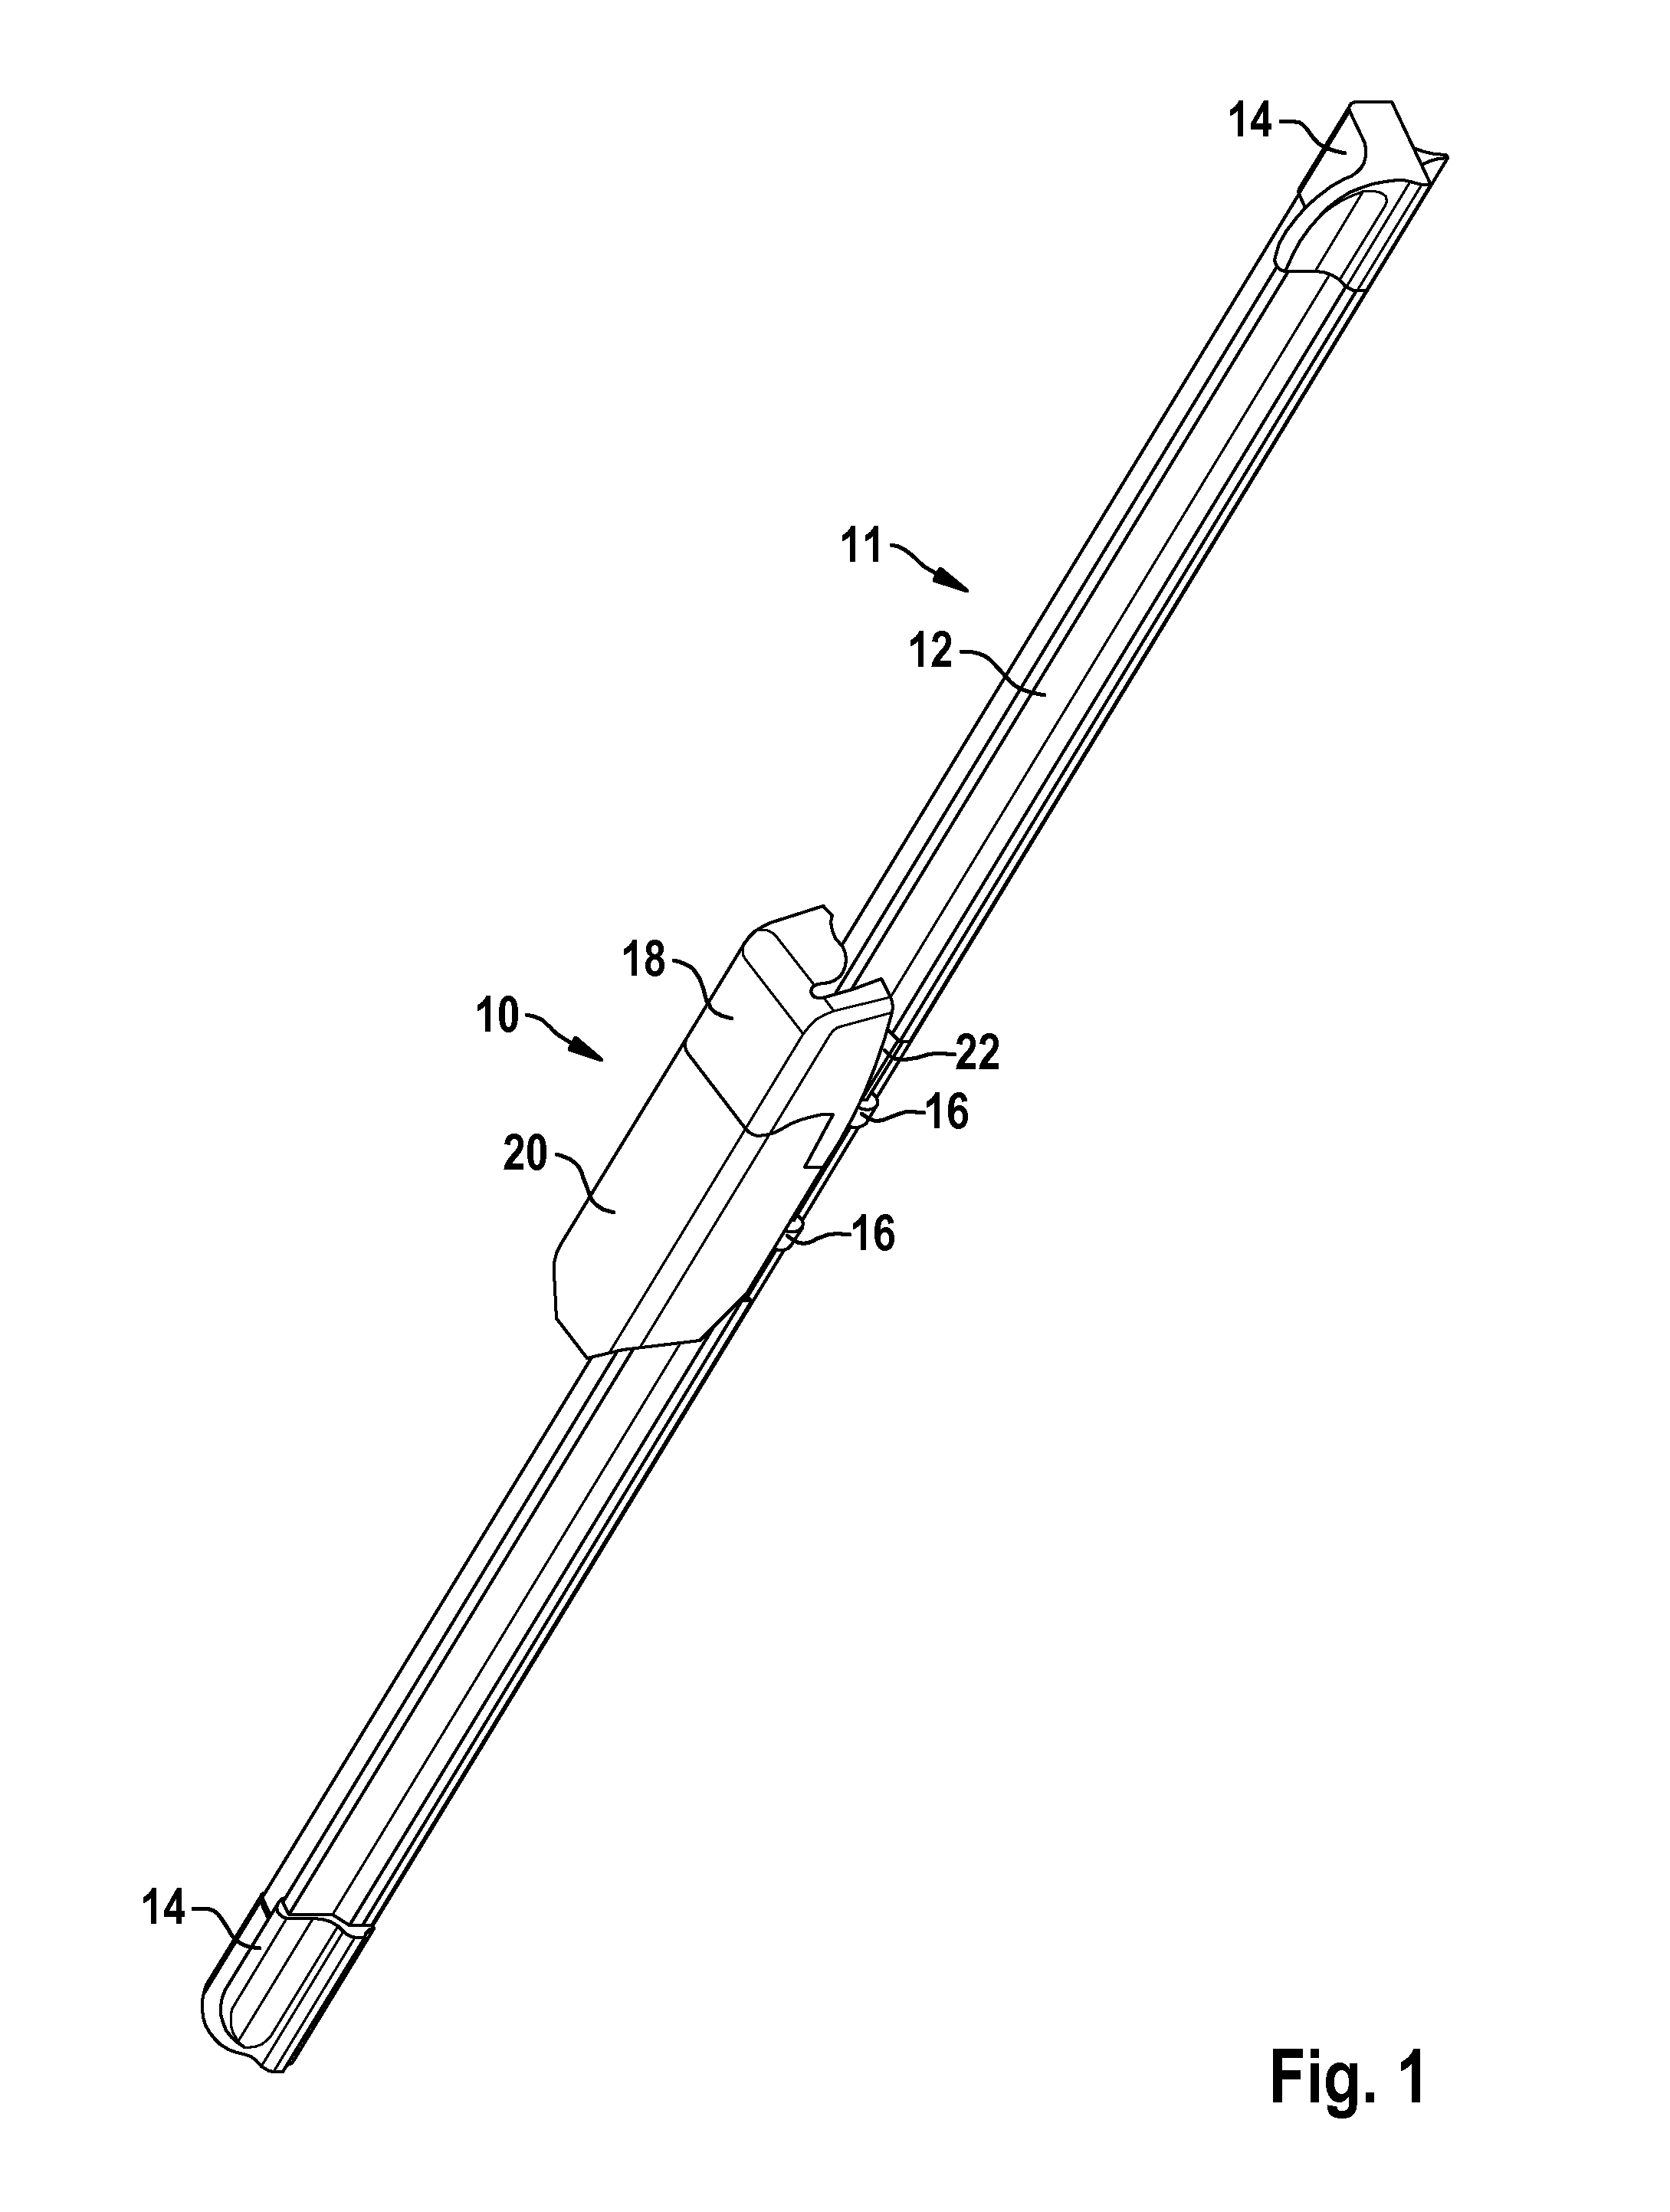 Connecting device for the articulated connection of a wiper blade to a wiper arm, and an adaptor